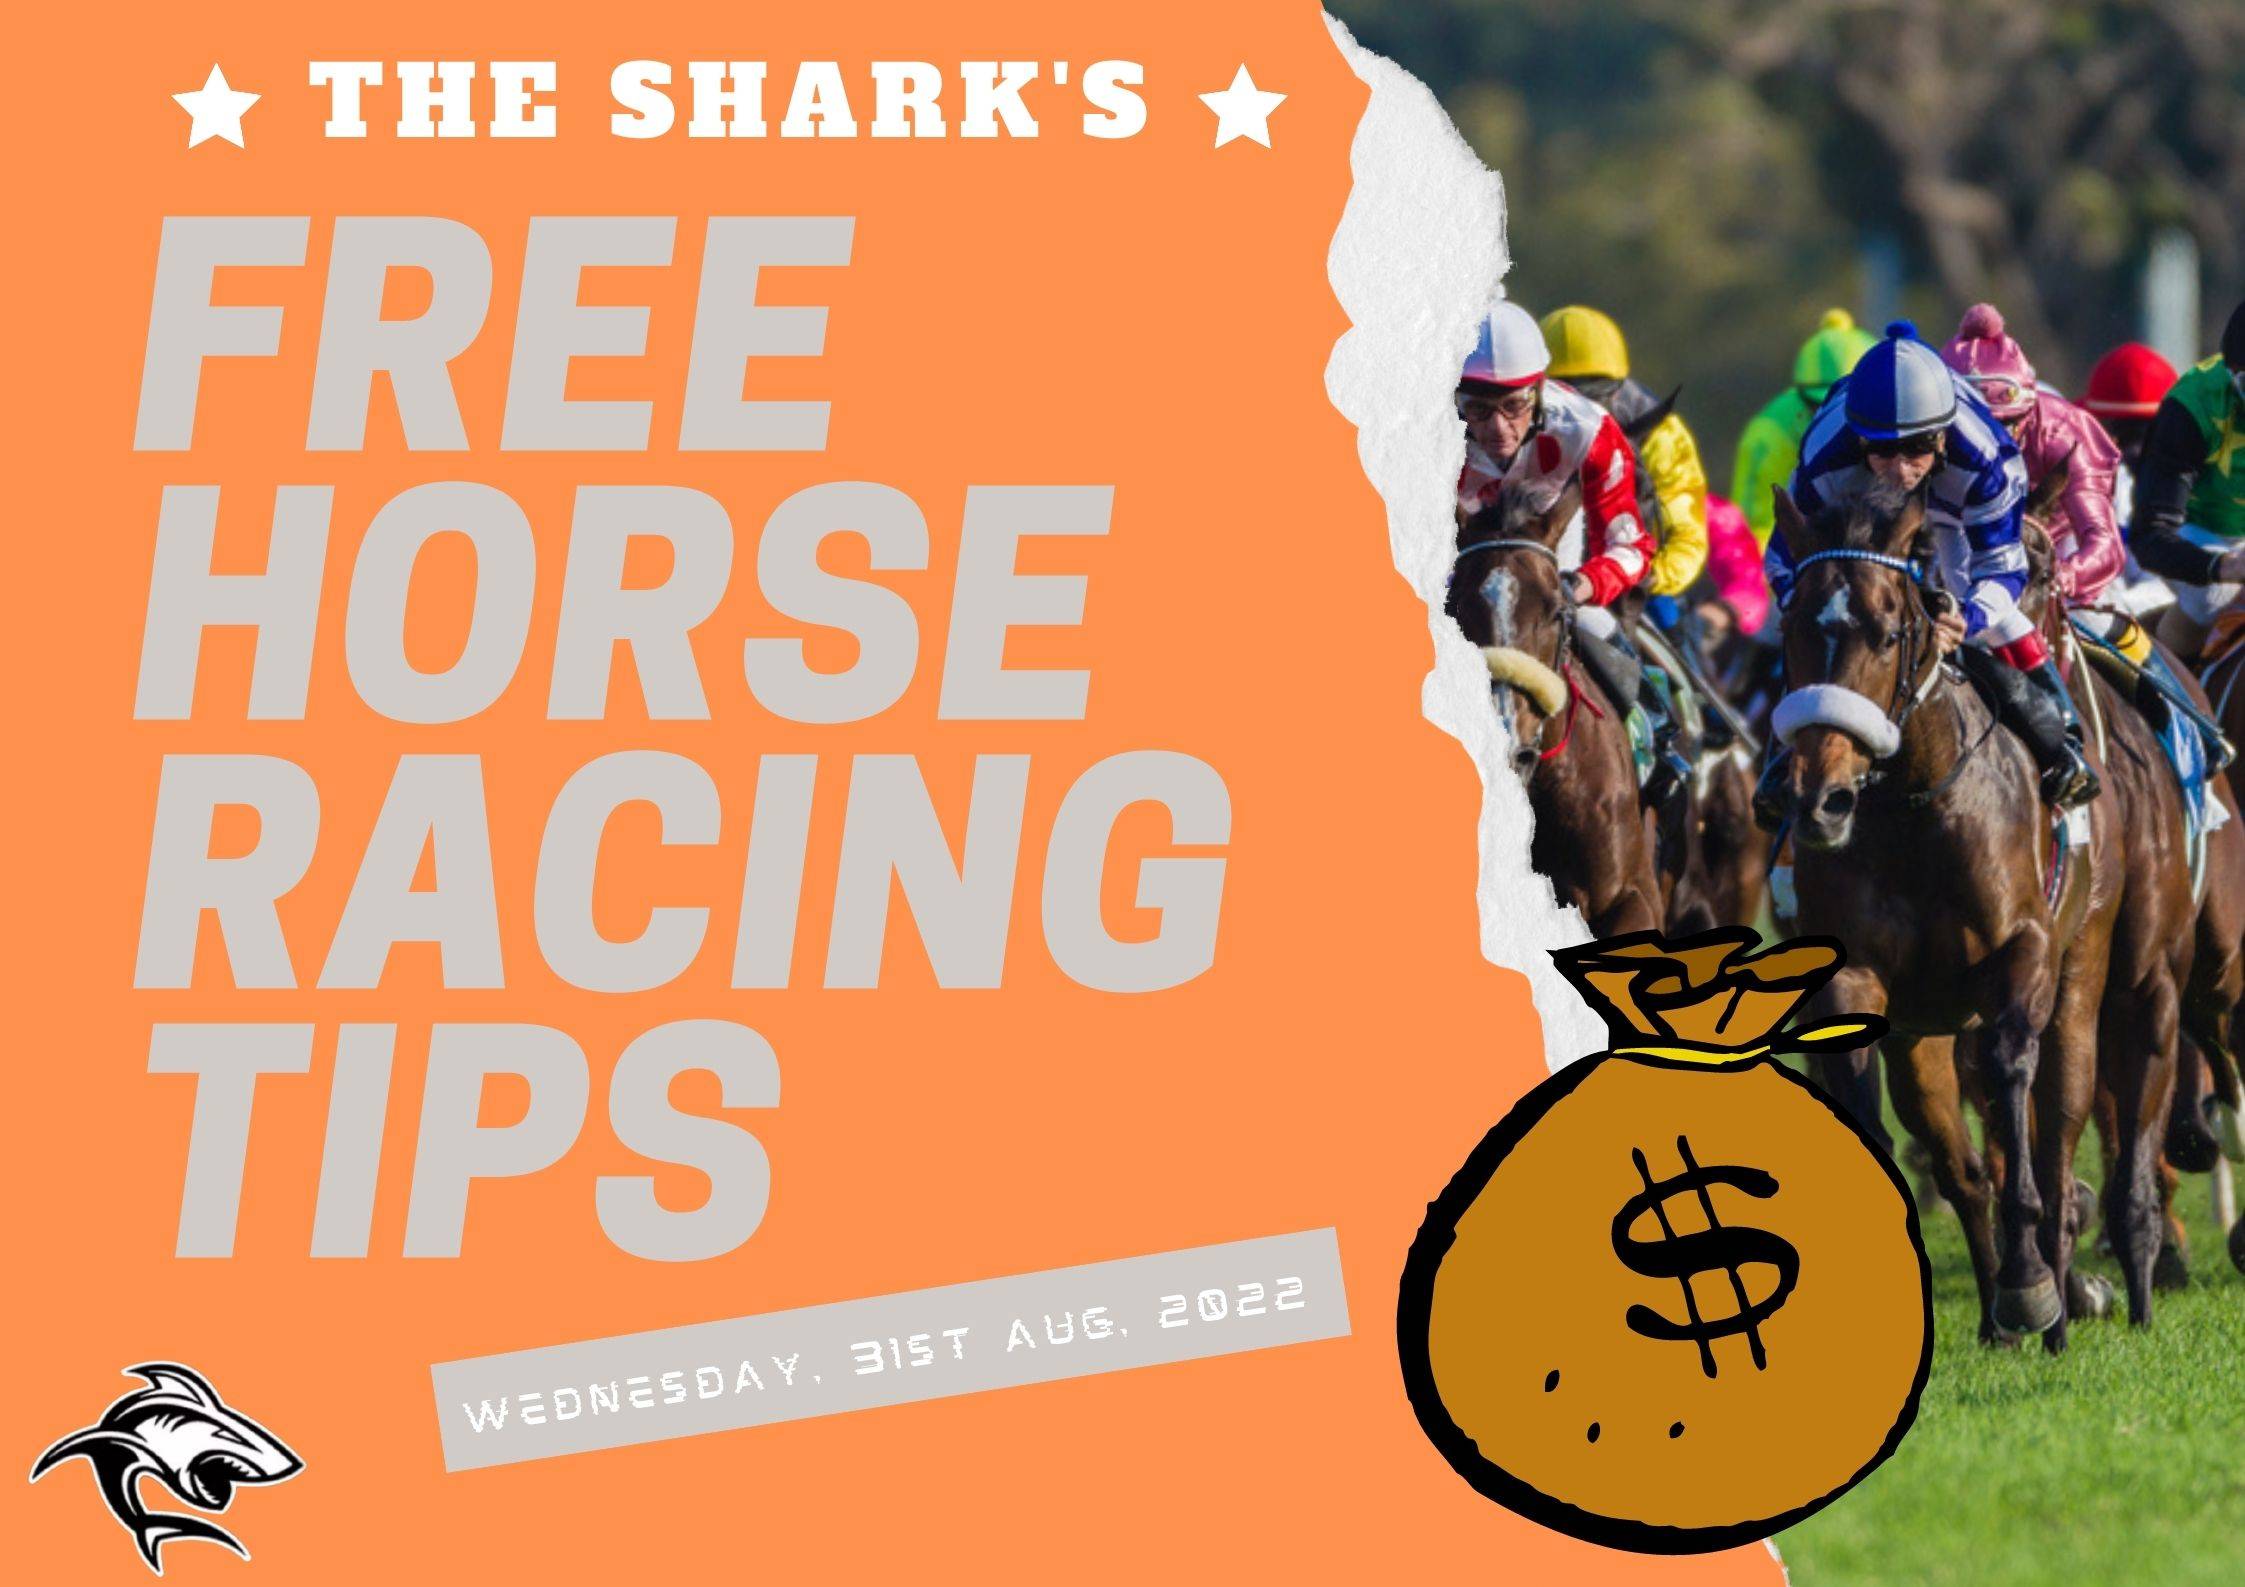 Free Horse Racing Tips - 31st Aug